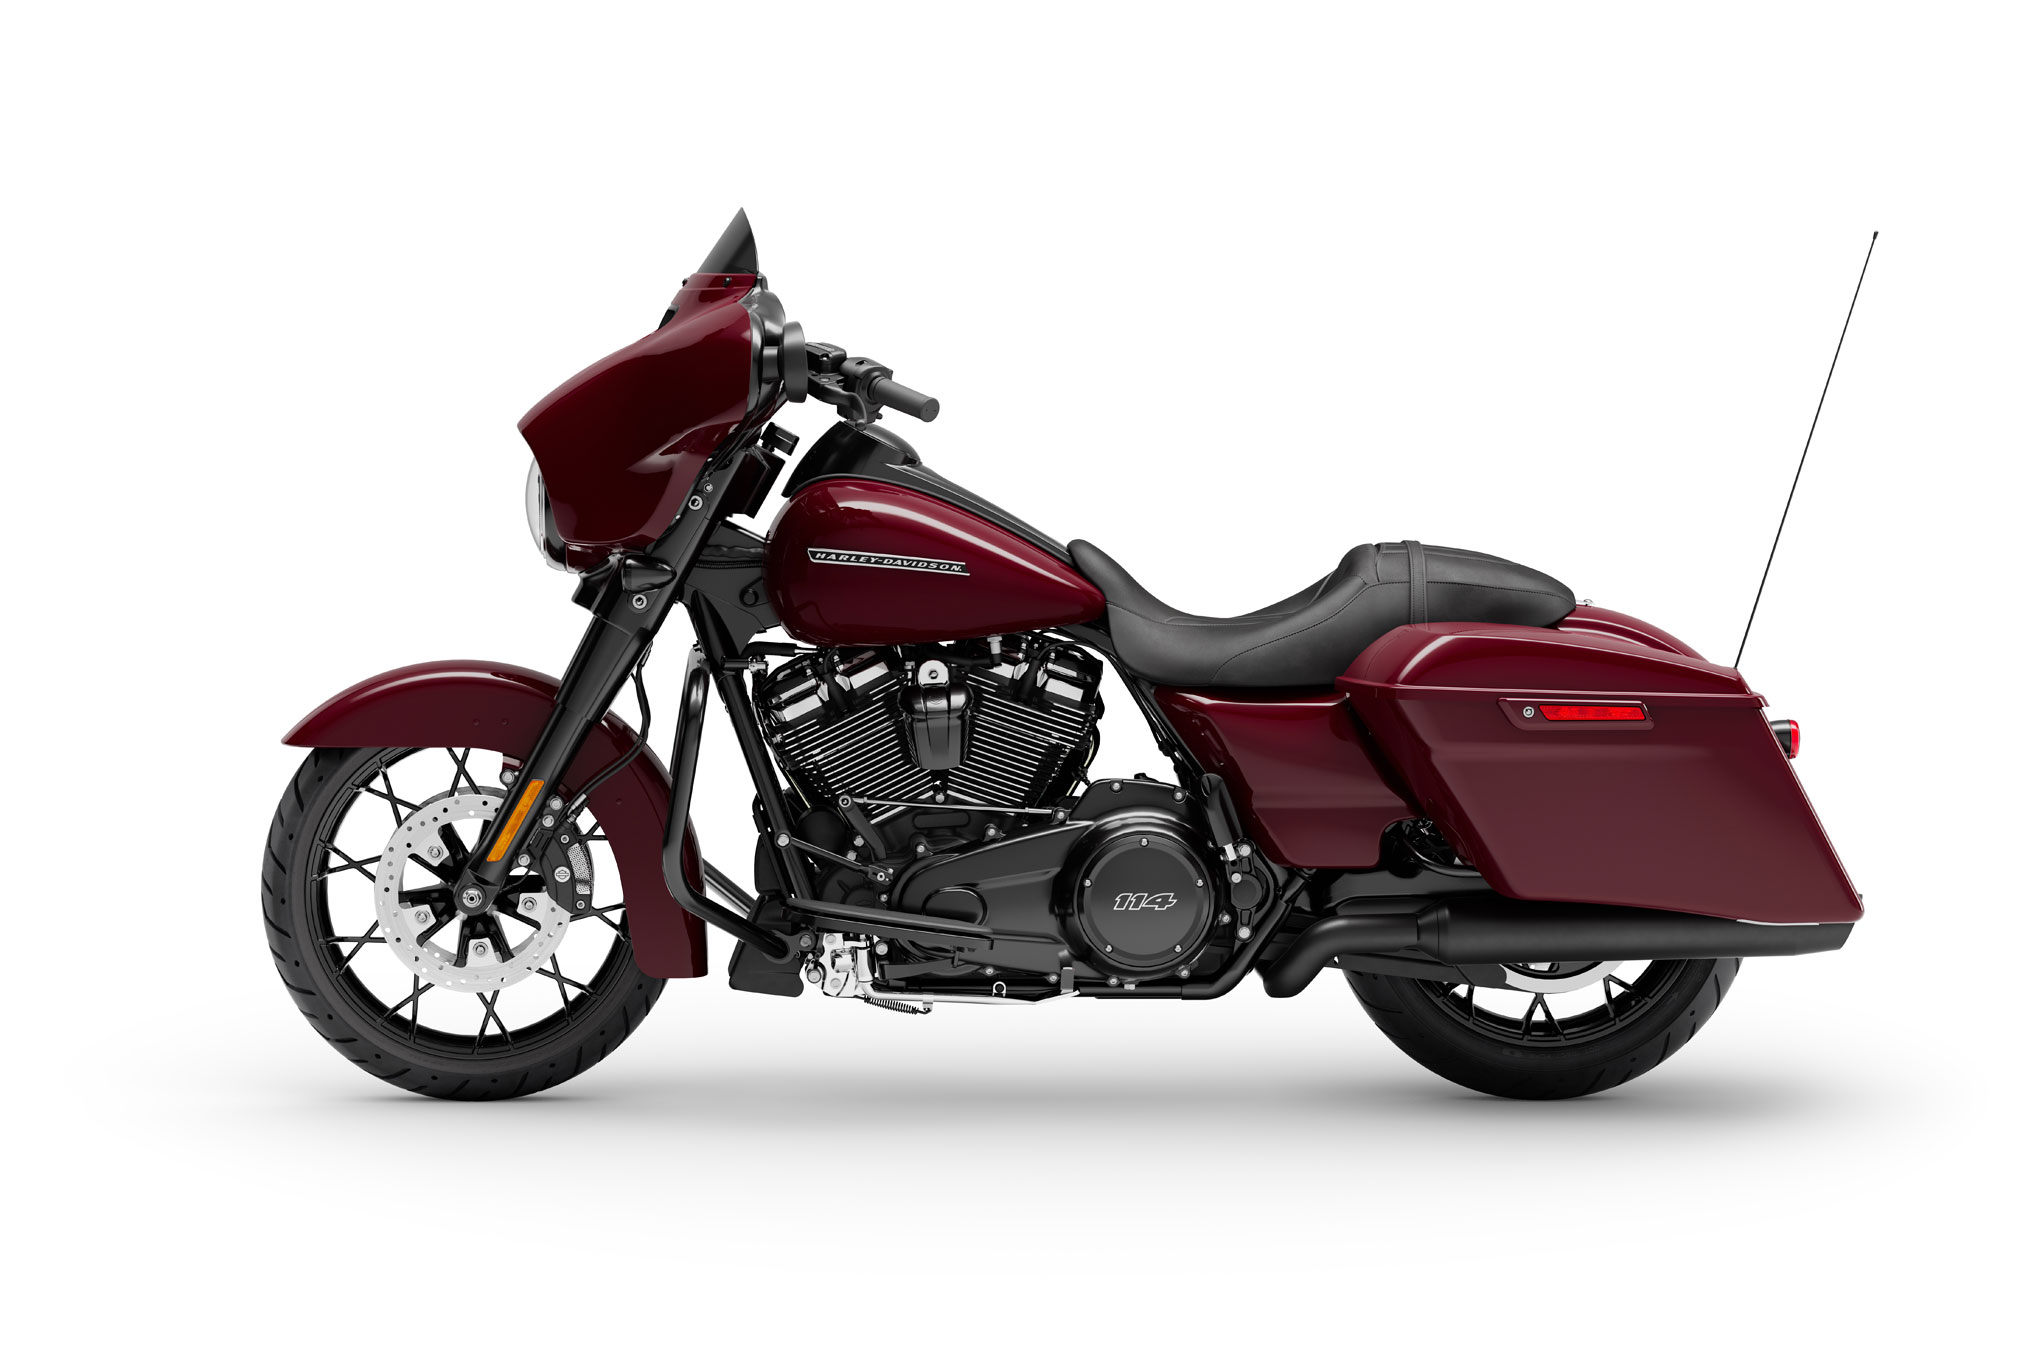 2020 Harley Davidson Street Glide Special Guide Total Motorcycle